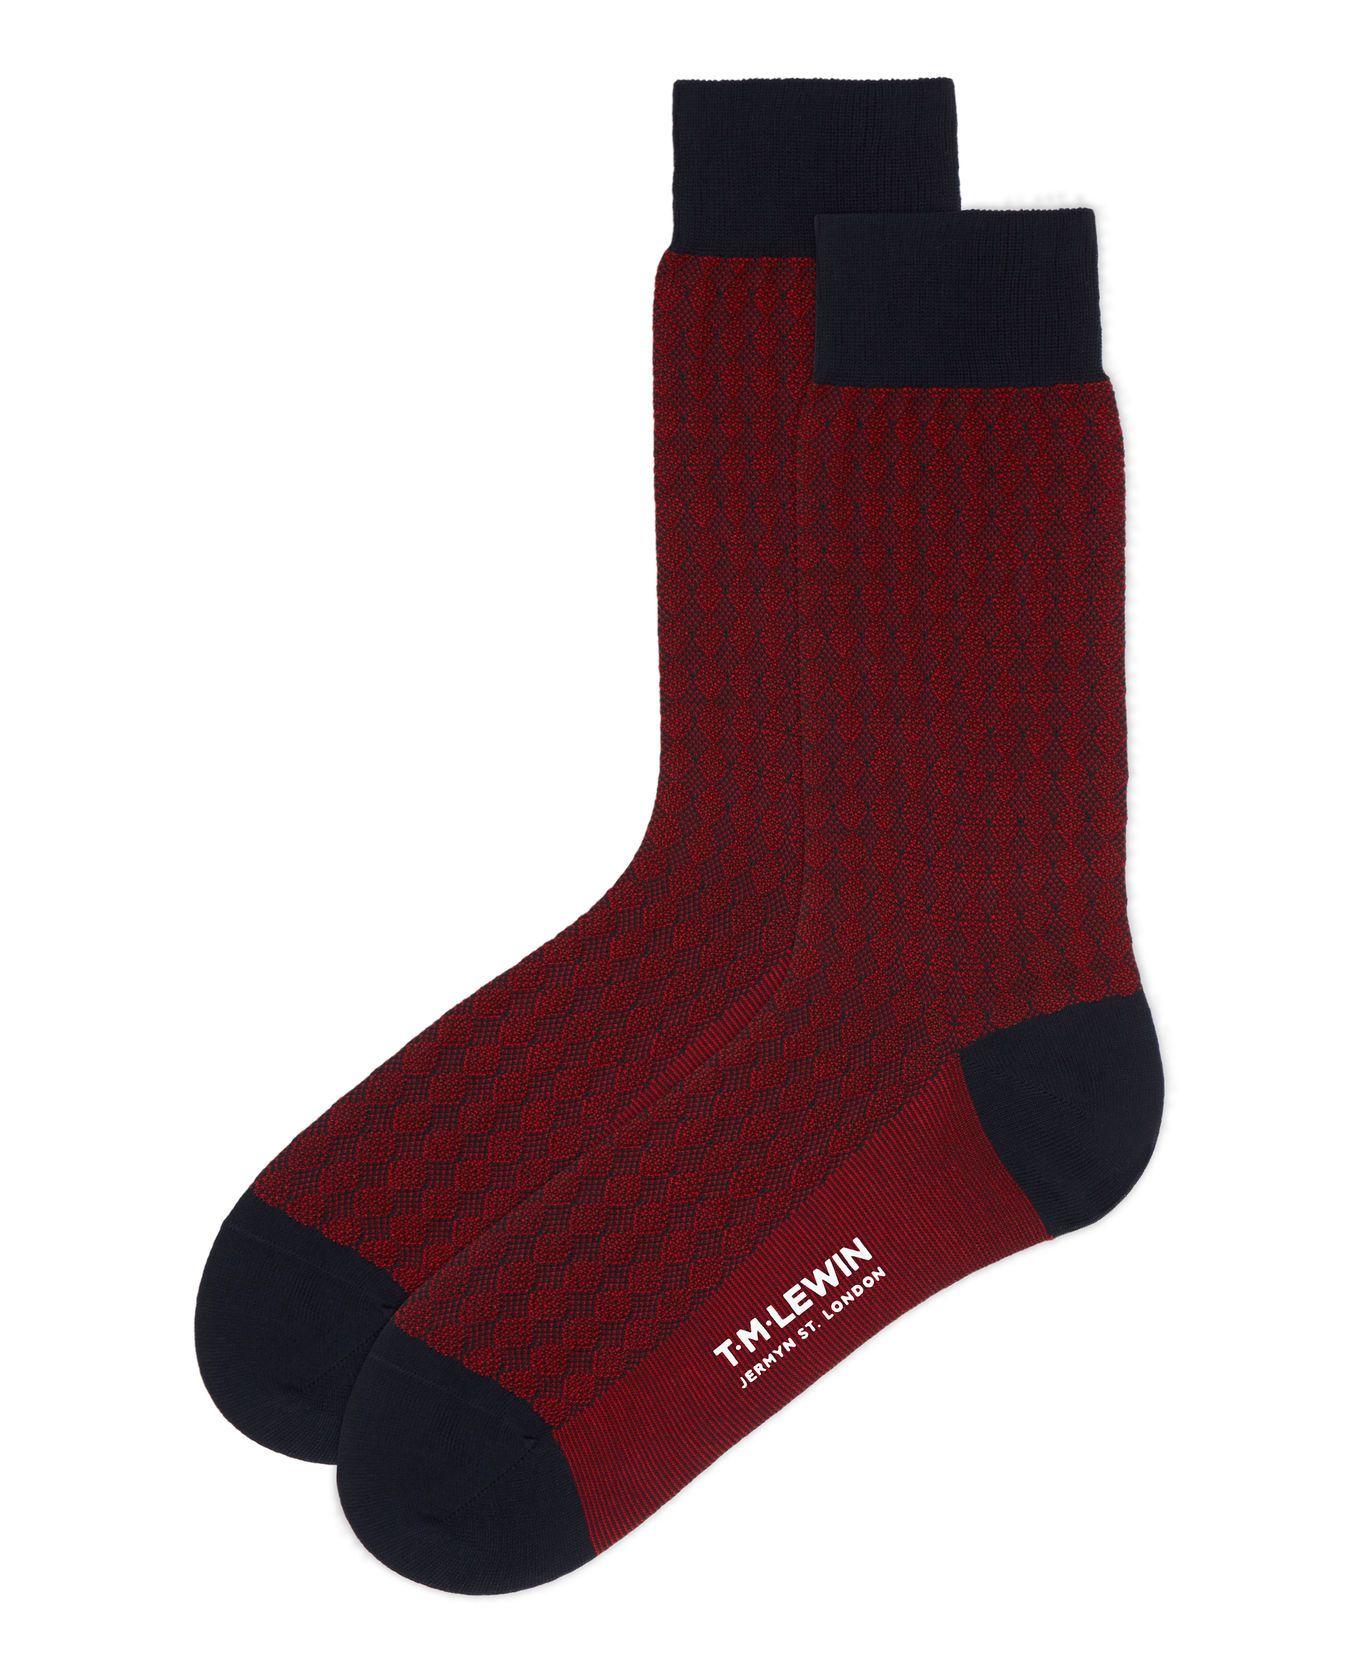 Double Red Diamond Logo - Made in England Red Diamond Link Socks. T.M.Lewin